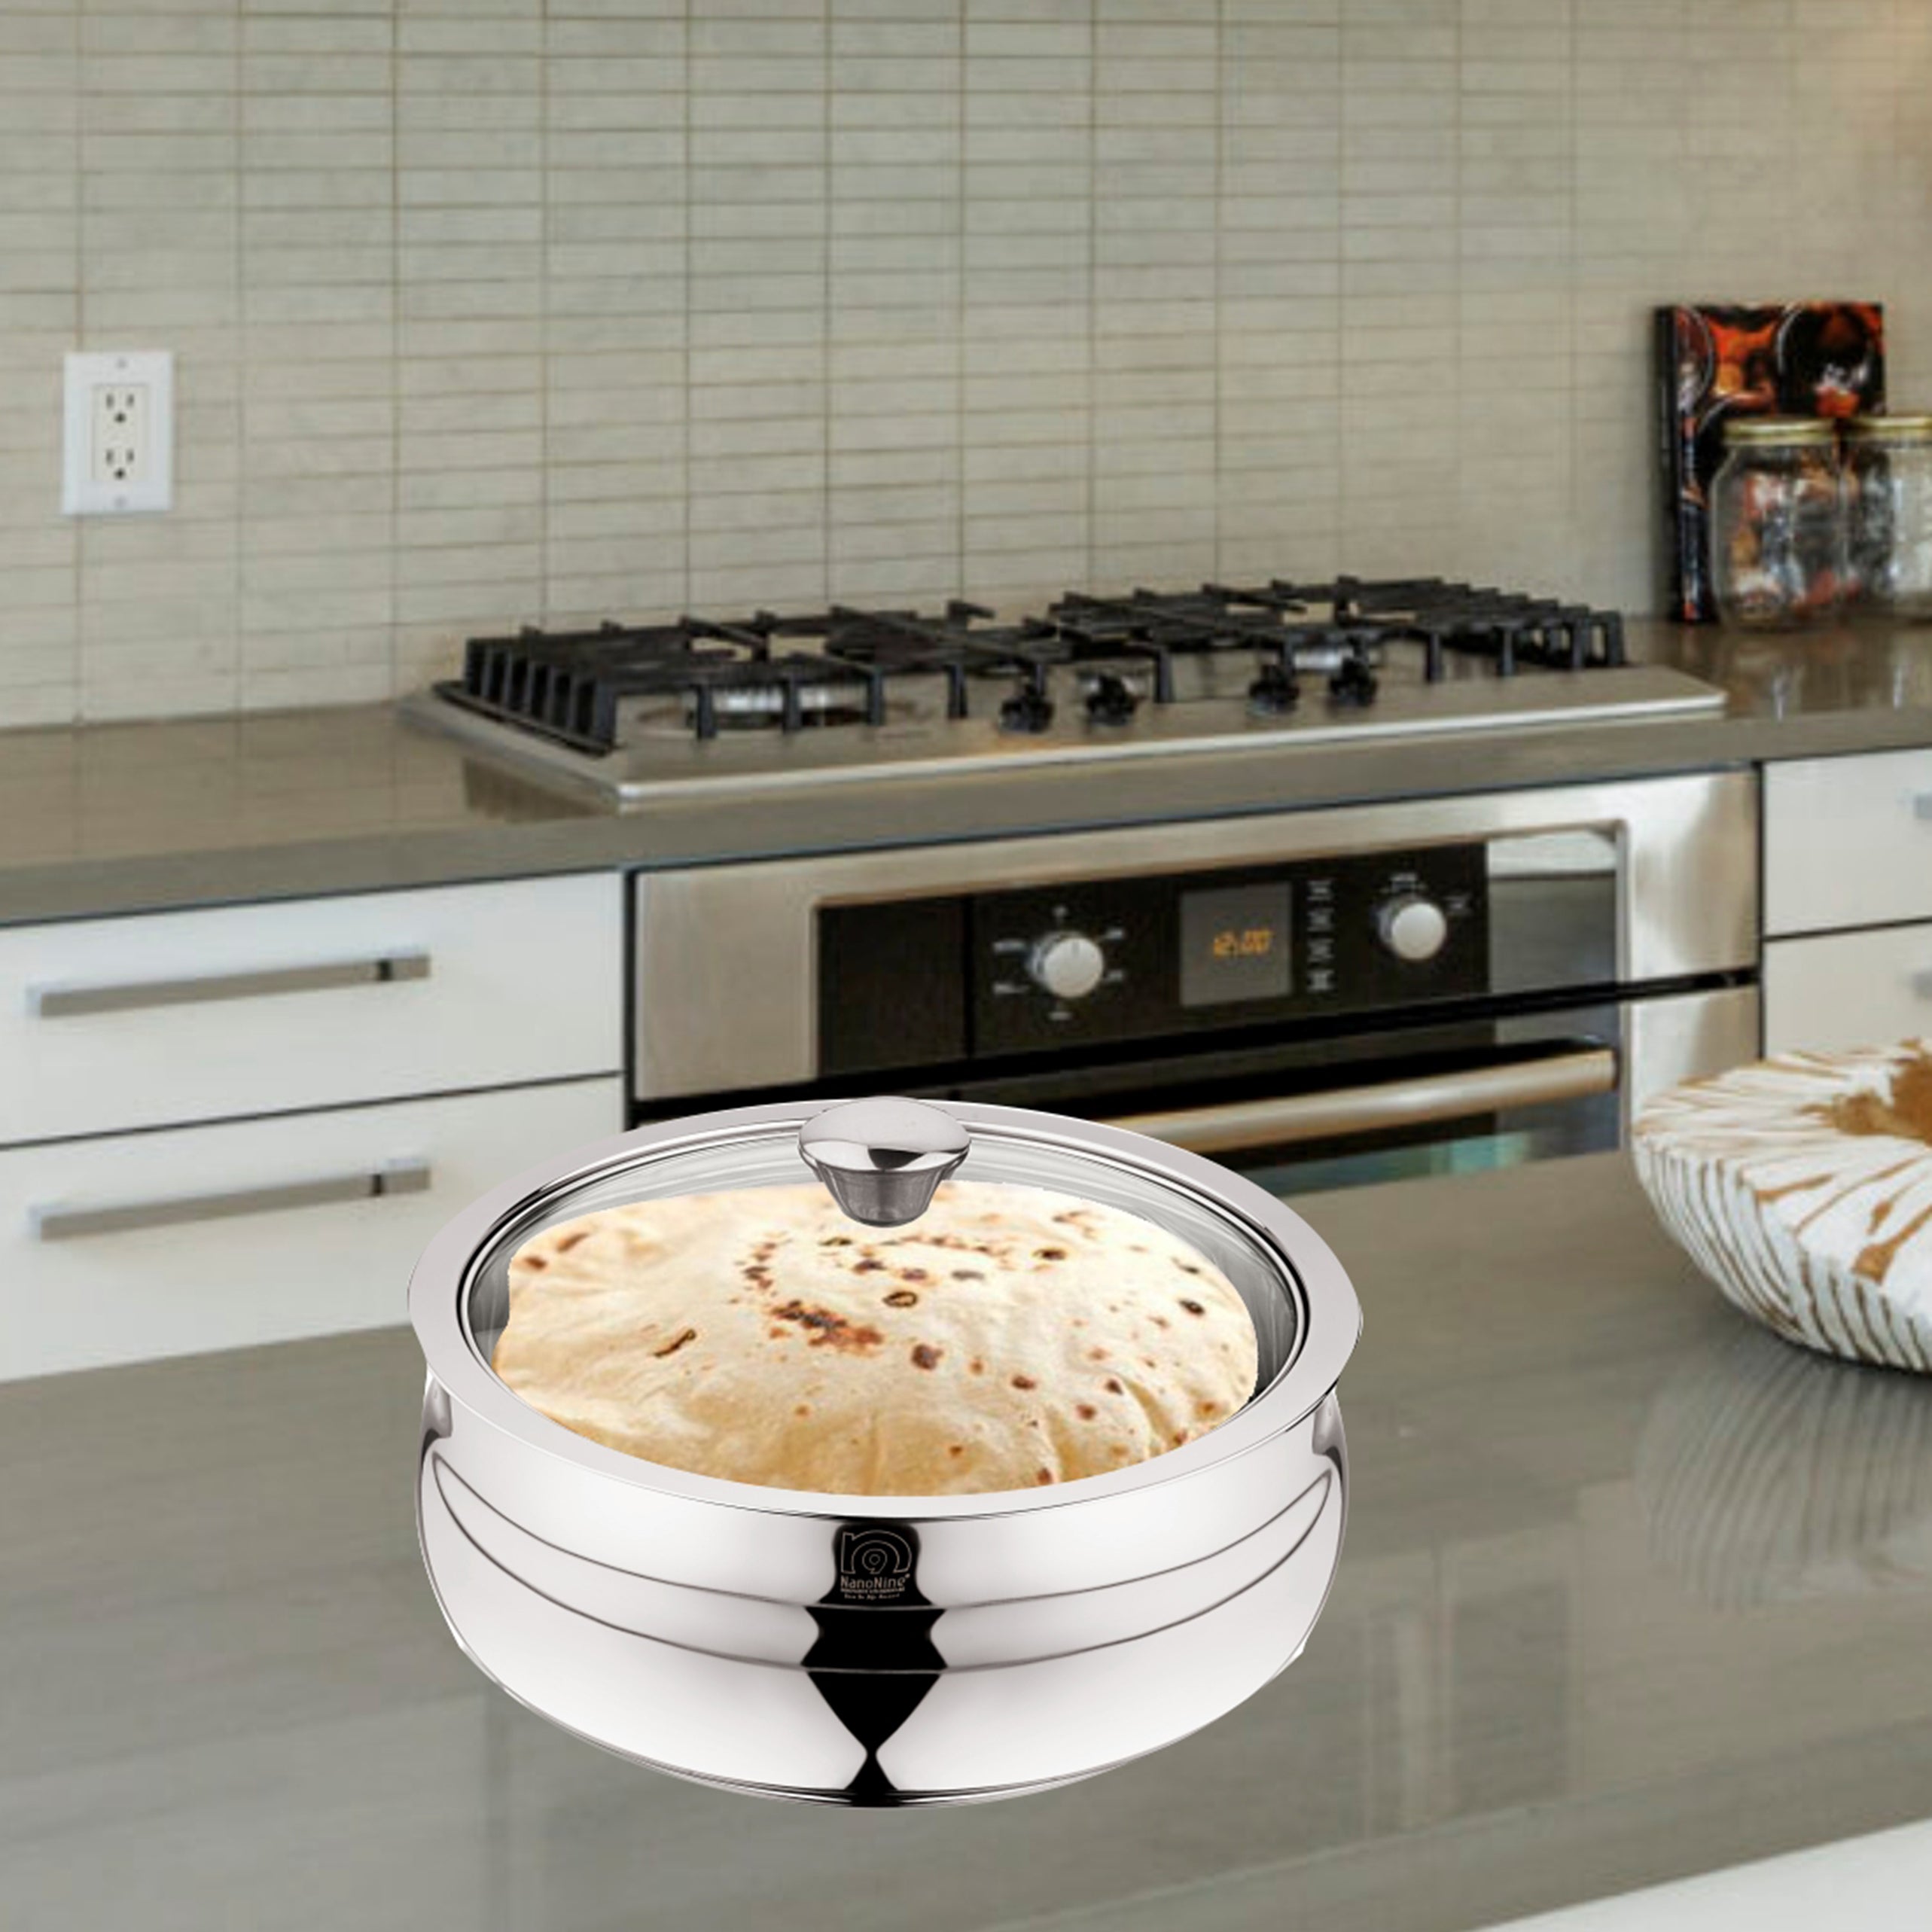 NanoNine Chapati Server Belly 1.24 L Double Wall Insulated Stainless Steel Serve Fresh Casserole with Steel Coaster and Glass Lid.